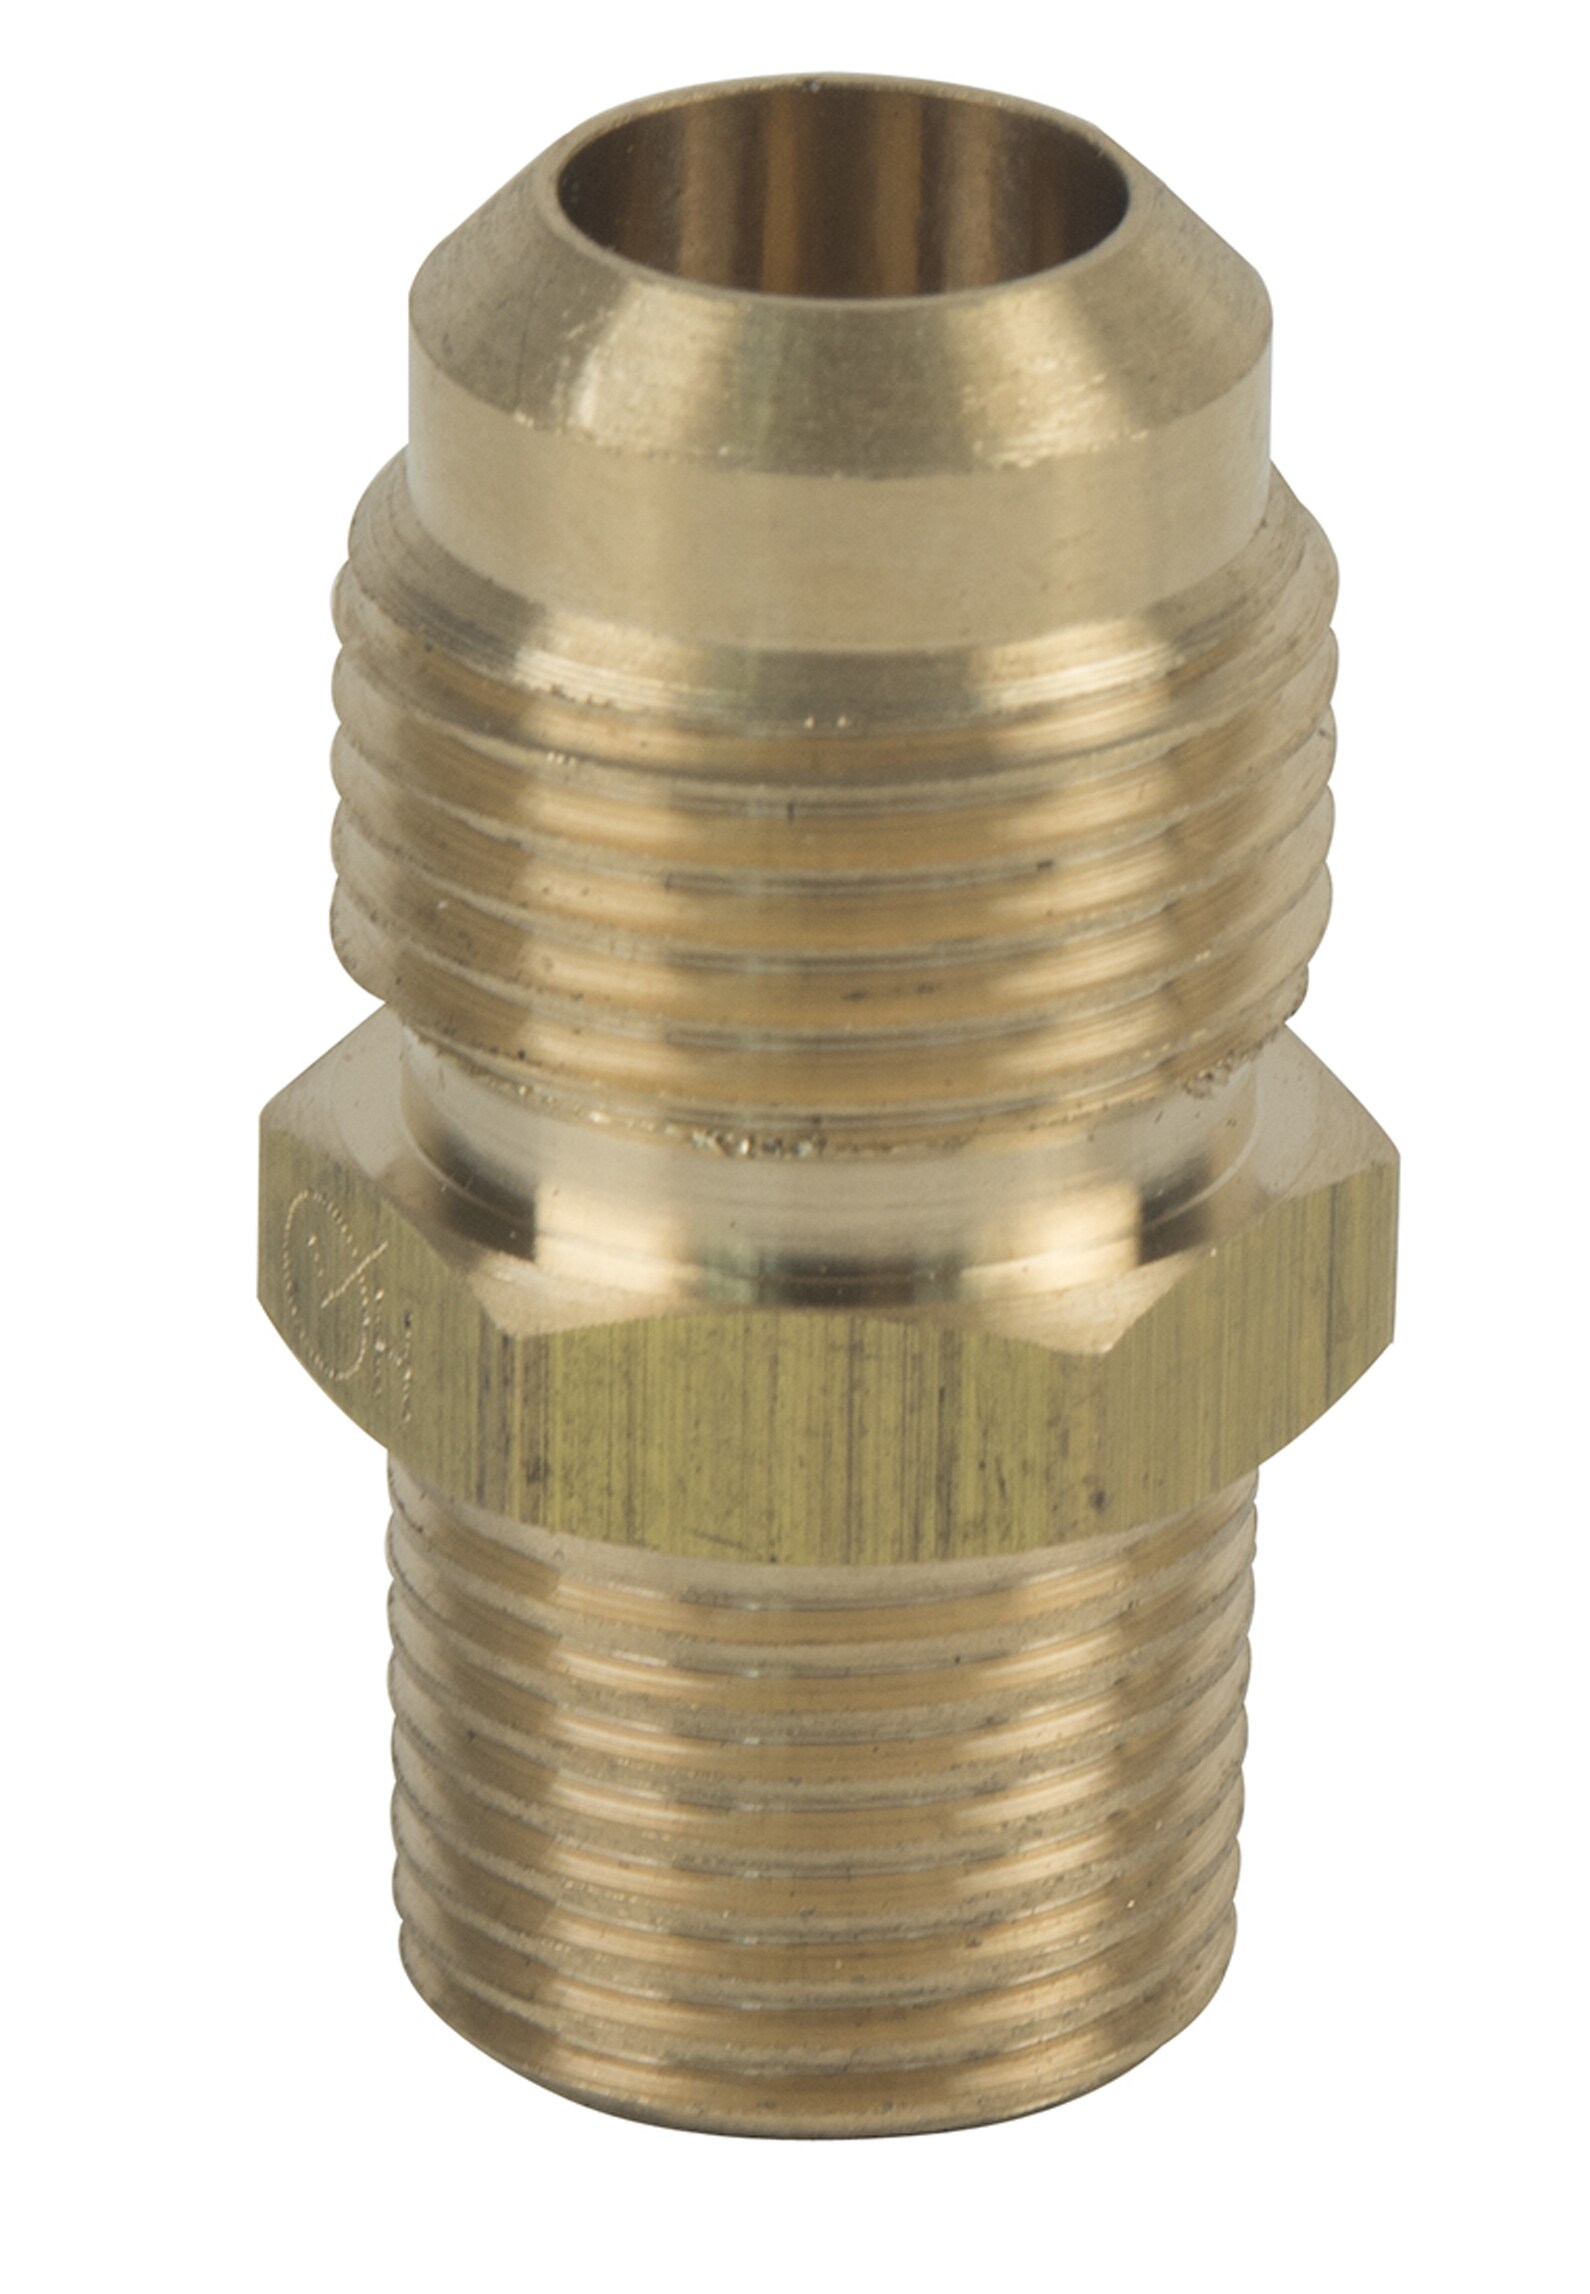 1.02 Length Brass Midland 12-049 Brass Inverted Flare Male Adapter 3/8 Inverted Flare x 3/8 Male NPTF Male 0.75 Hex 3/8 Inverted Flare x 3/8 Male NPTF